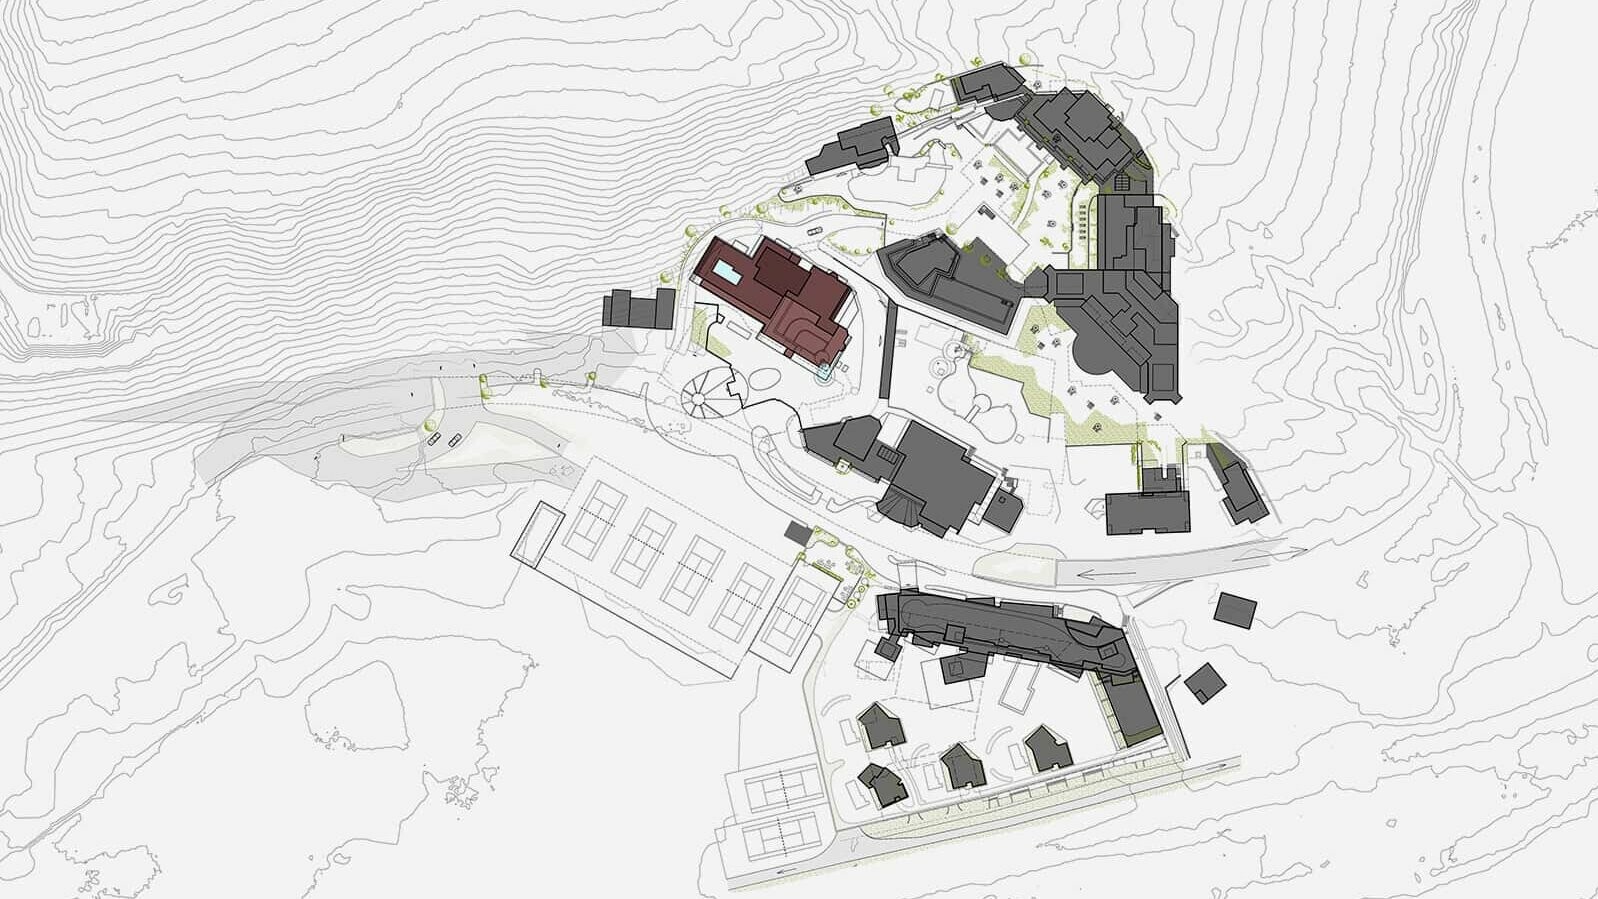 Site plan of the hotel complex in the middle of South Tyrol